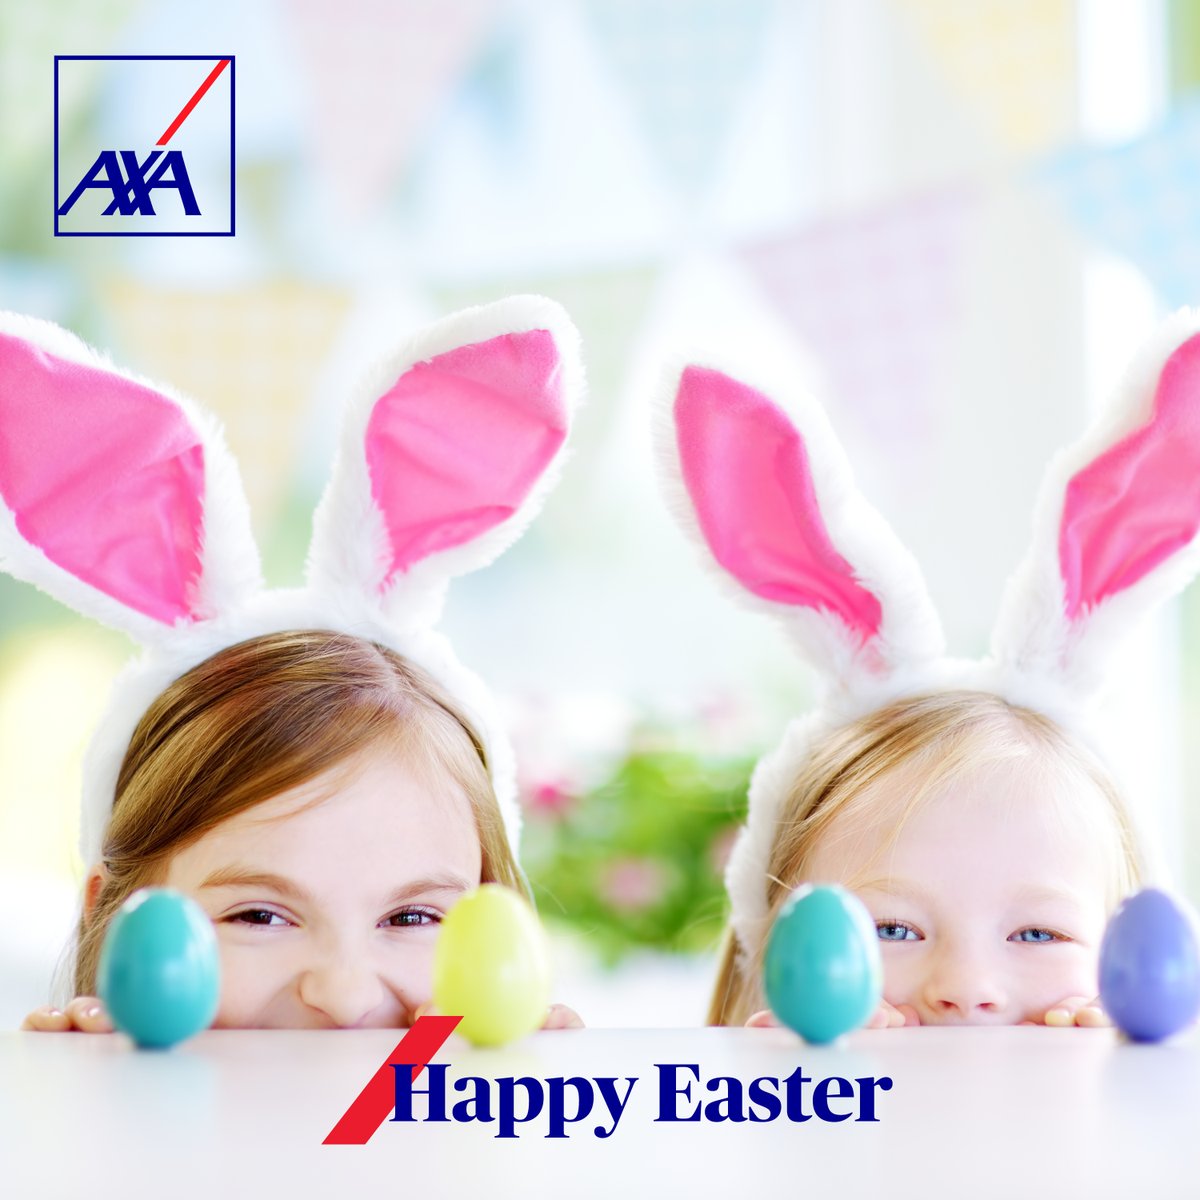 Wishing all of our staff and customers a wonderful Easter. #KnowYouCan